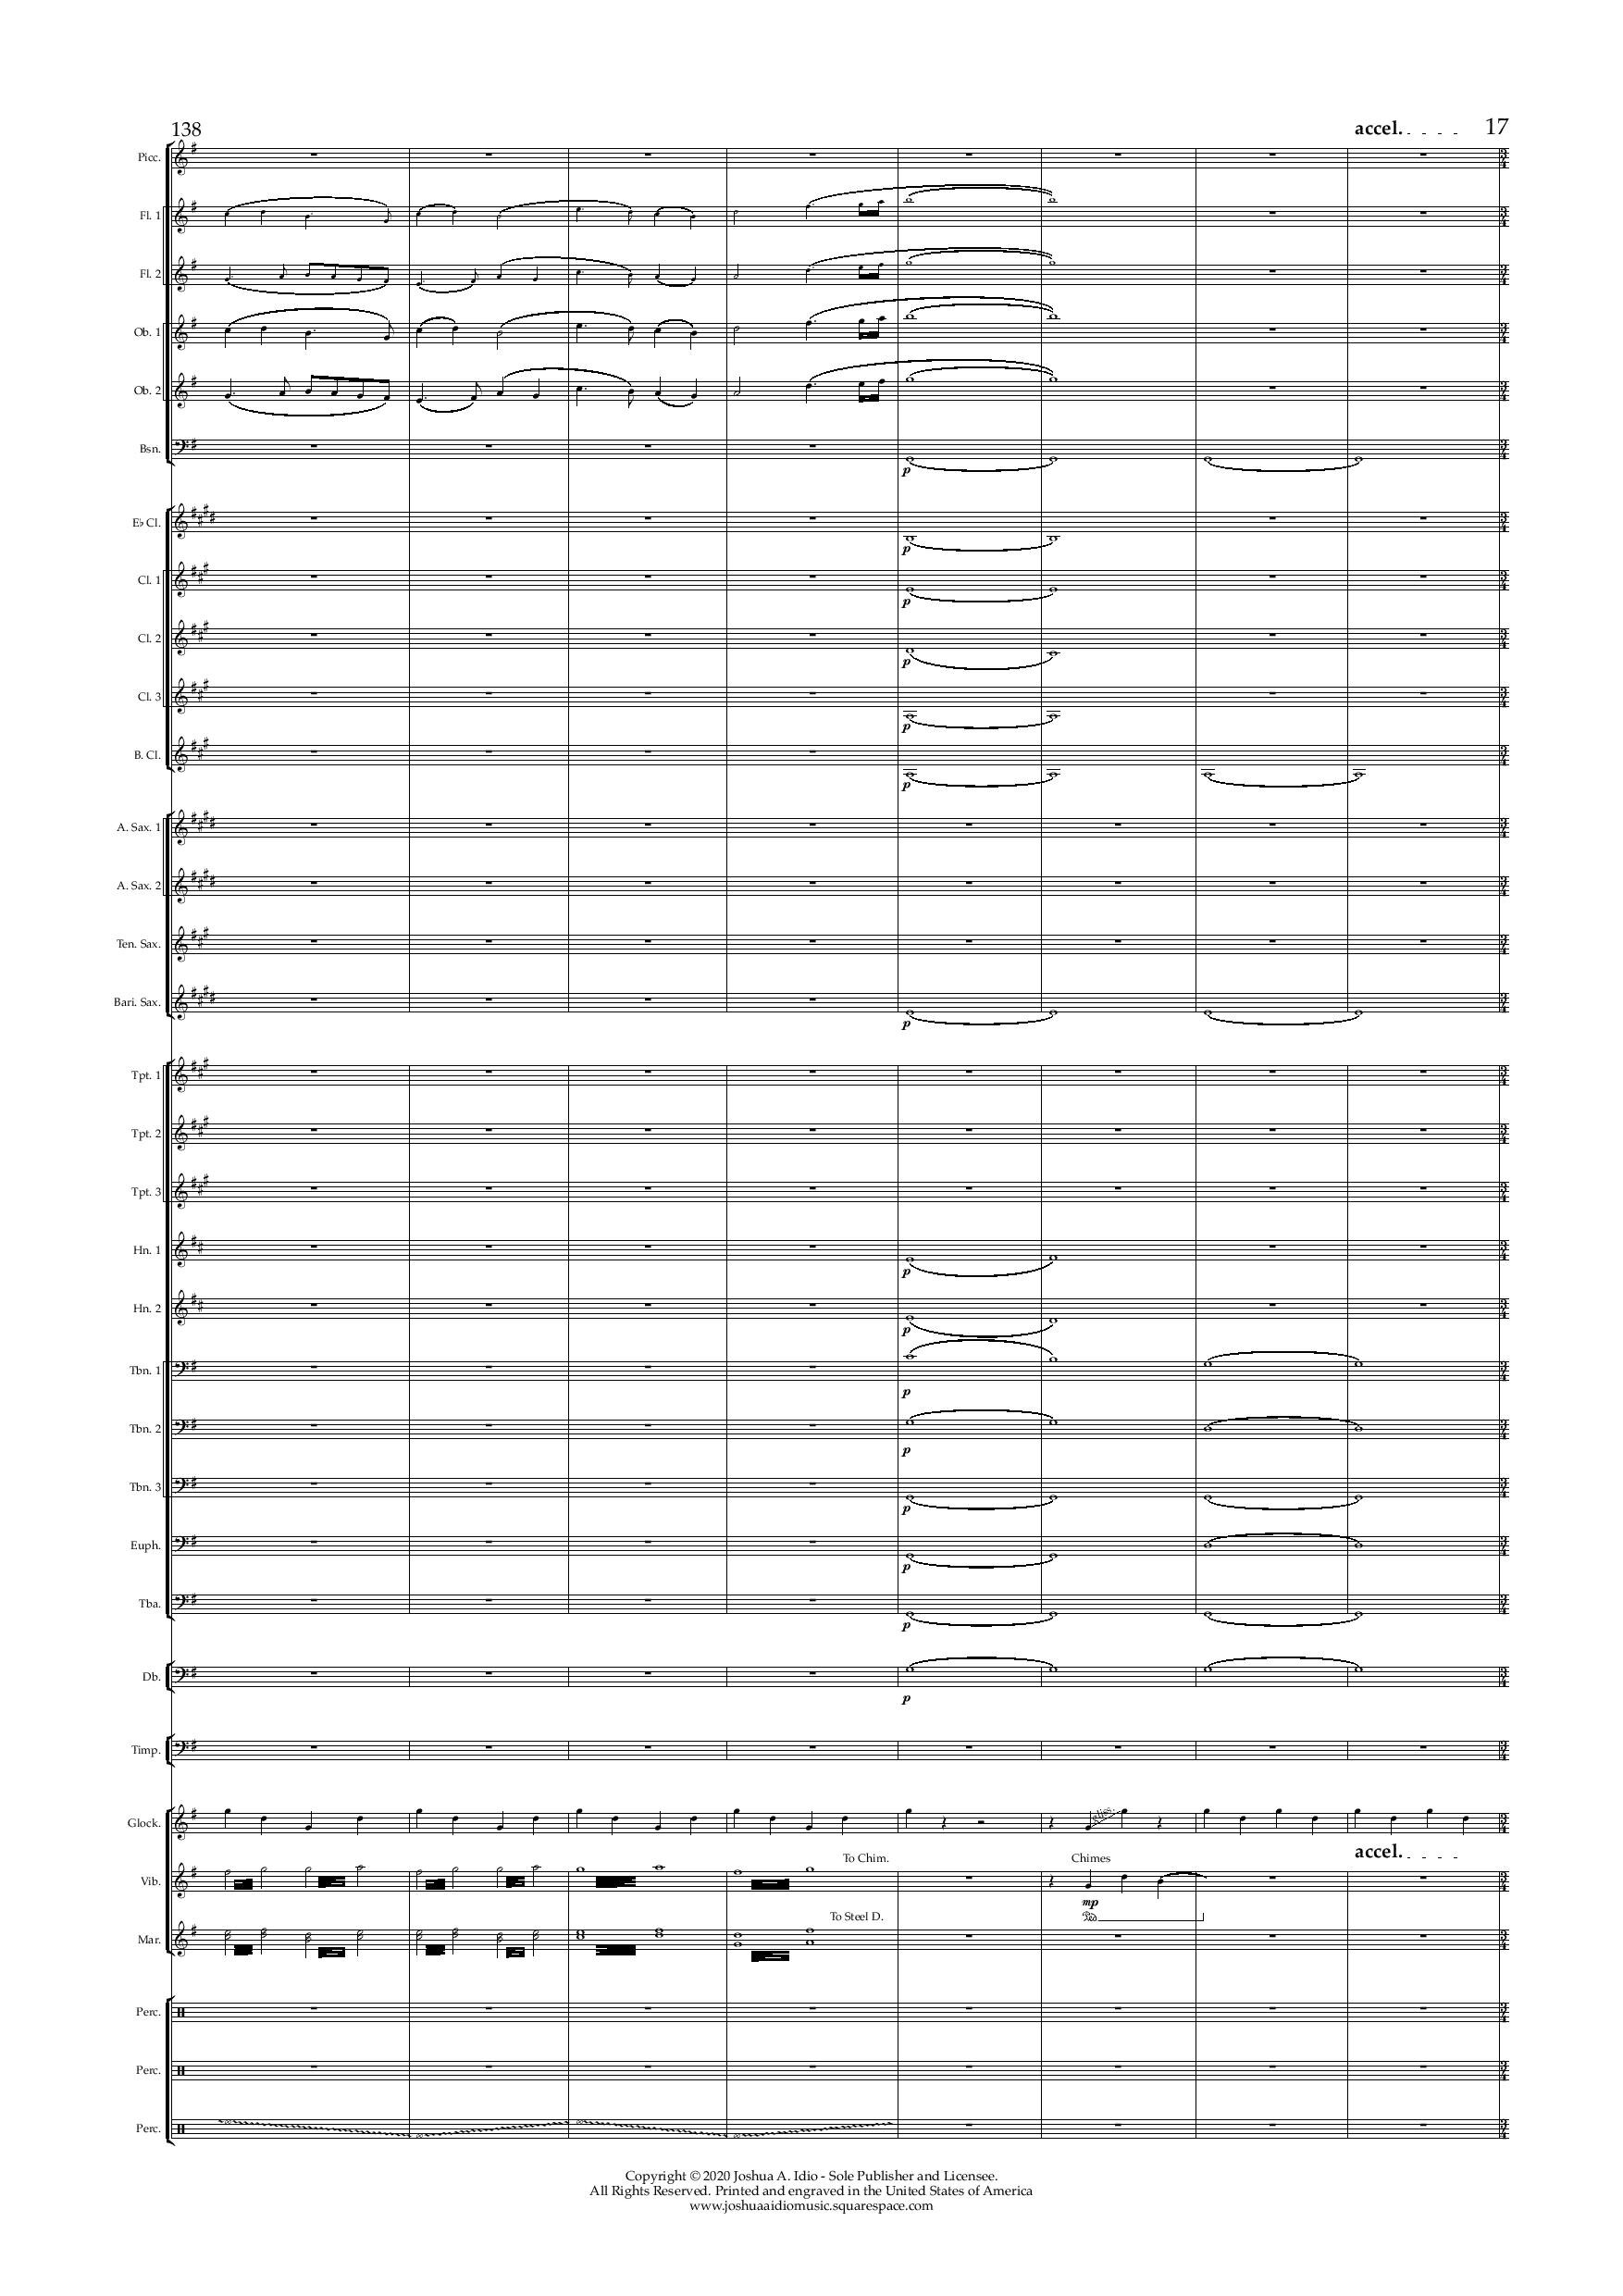 The Cruise Line Dream - Conductor s Score-page-017.jpg